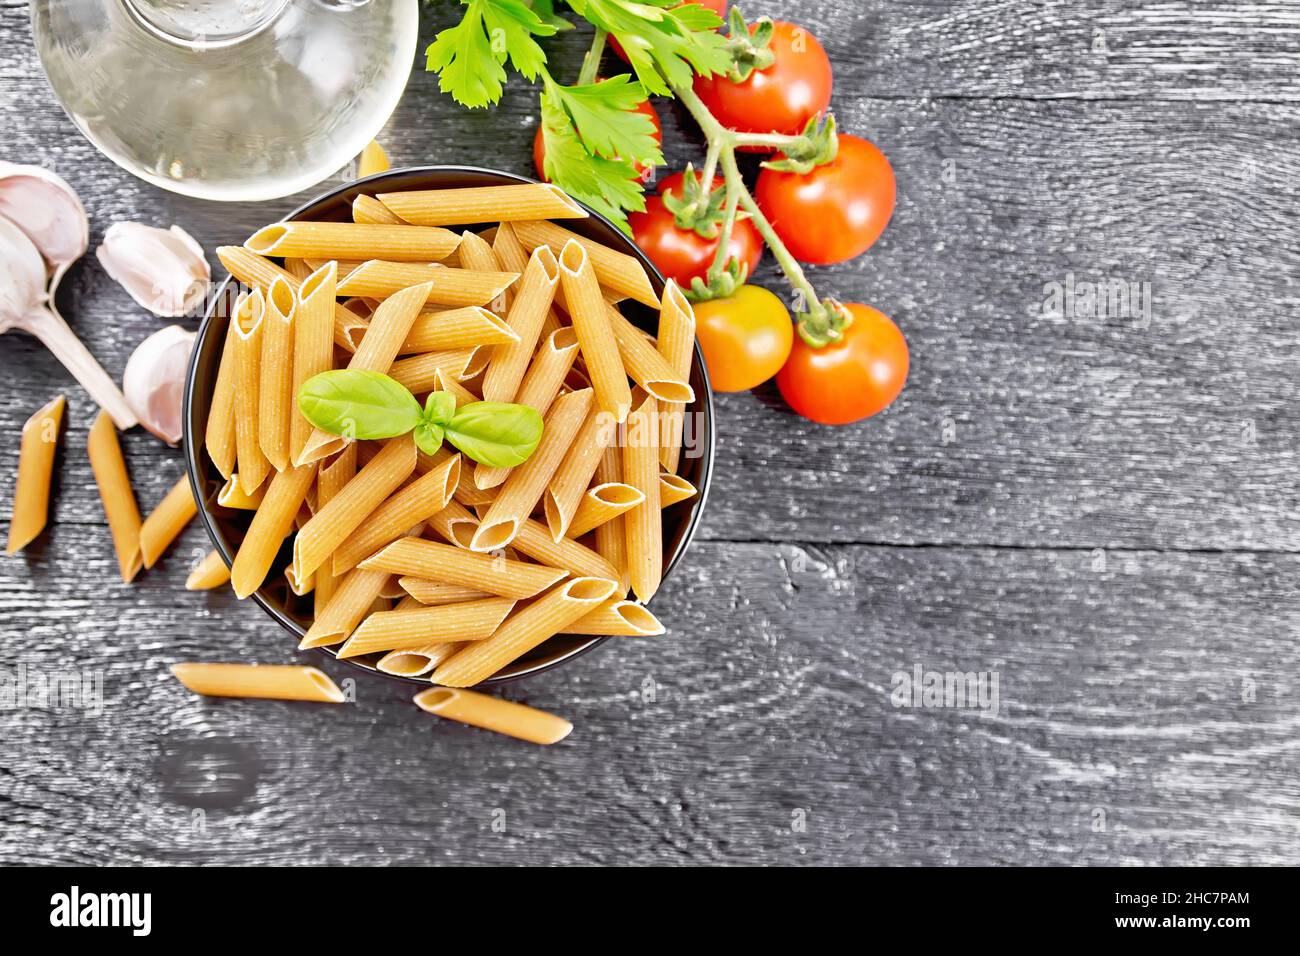 Whole grain flour penne pasta in a bowl, tomatoes, garlic, vegetable oil in a decanter and parsley on wooden board background from above Stock Photo